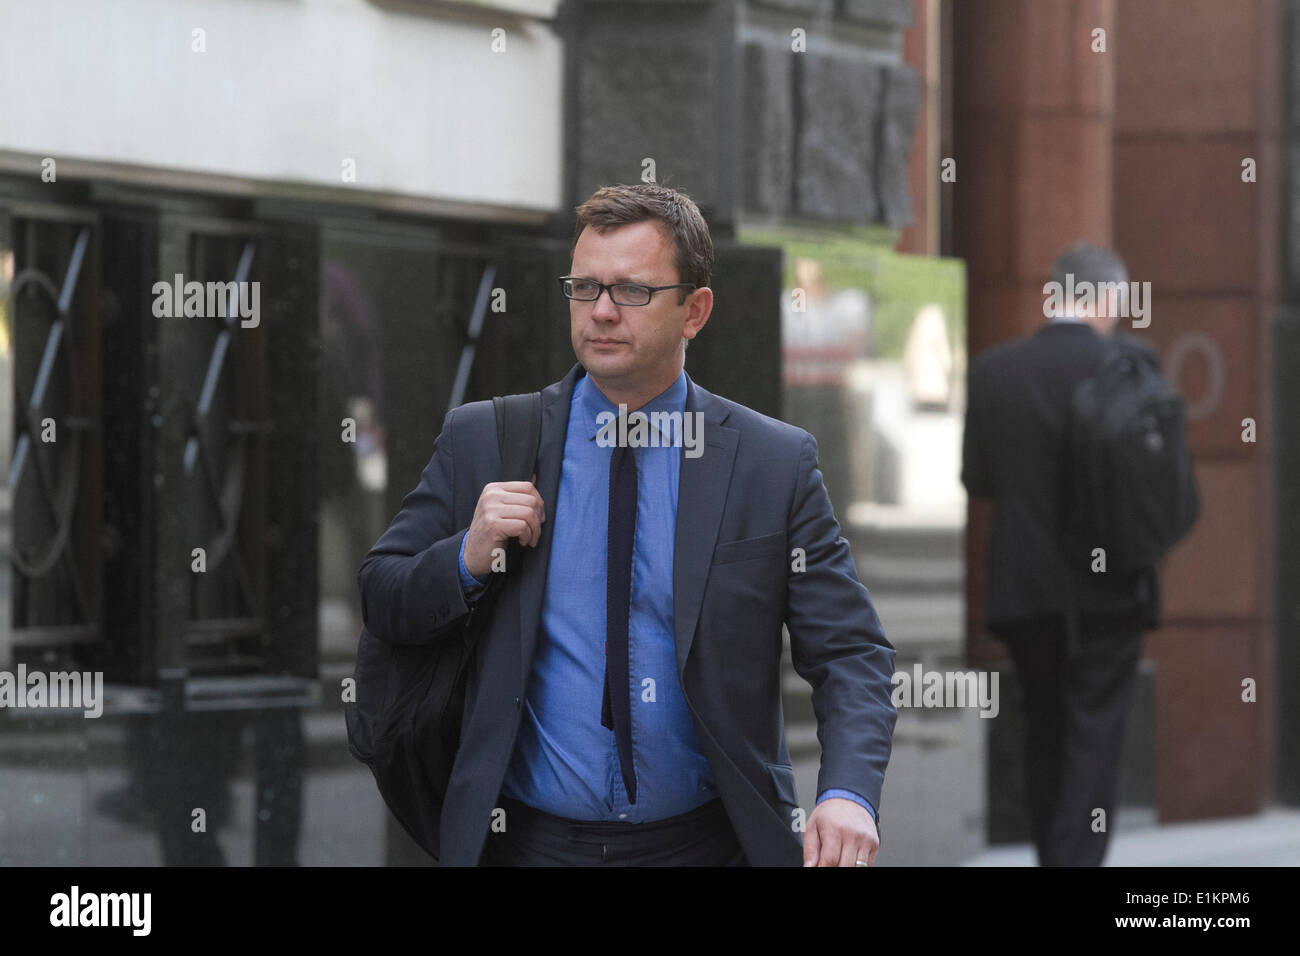 London UK. 6th June 2014. Former Director of communications at Downing Street and News of the World editor Andy Coulson  arrives at the Old Bailey as  the judge starts summing up after 7 months. Rebekah Brooks and other defendants including husband Charlie Brooks, Andy Coulson, Ian Edmonson, Clive Goodman;Cheryl Carter, Stuart Kuttner and Mark Hanna are charged in conspiracy to intercept the voice mails of celebrities and victims of crime and members of the British Royal Family Credit:  amer ghazzal/Alamy Live News Stock Photo